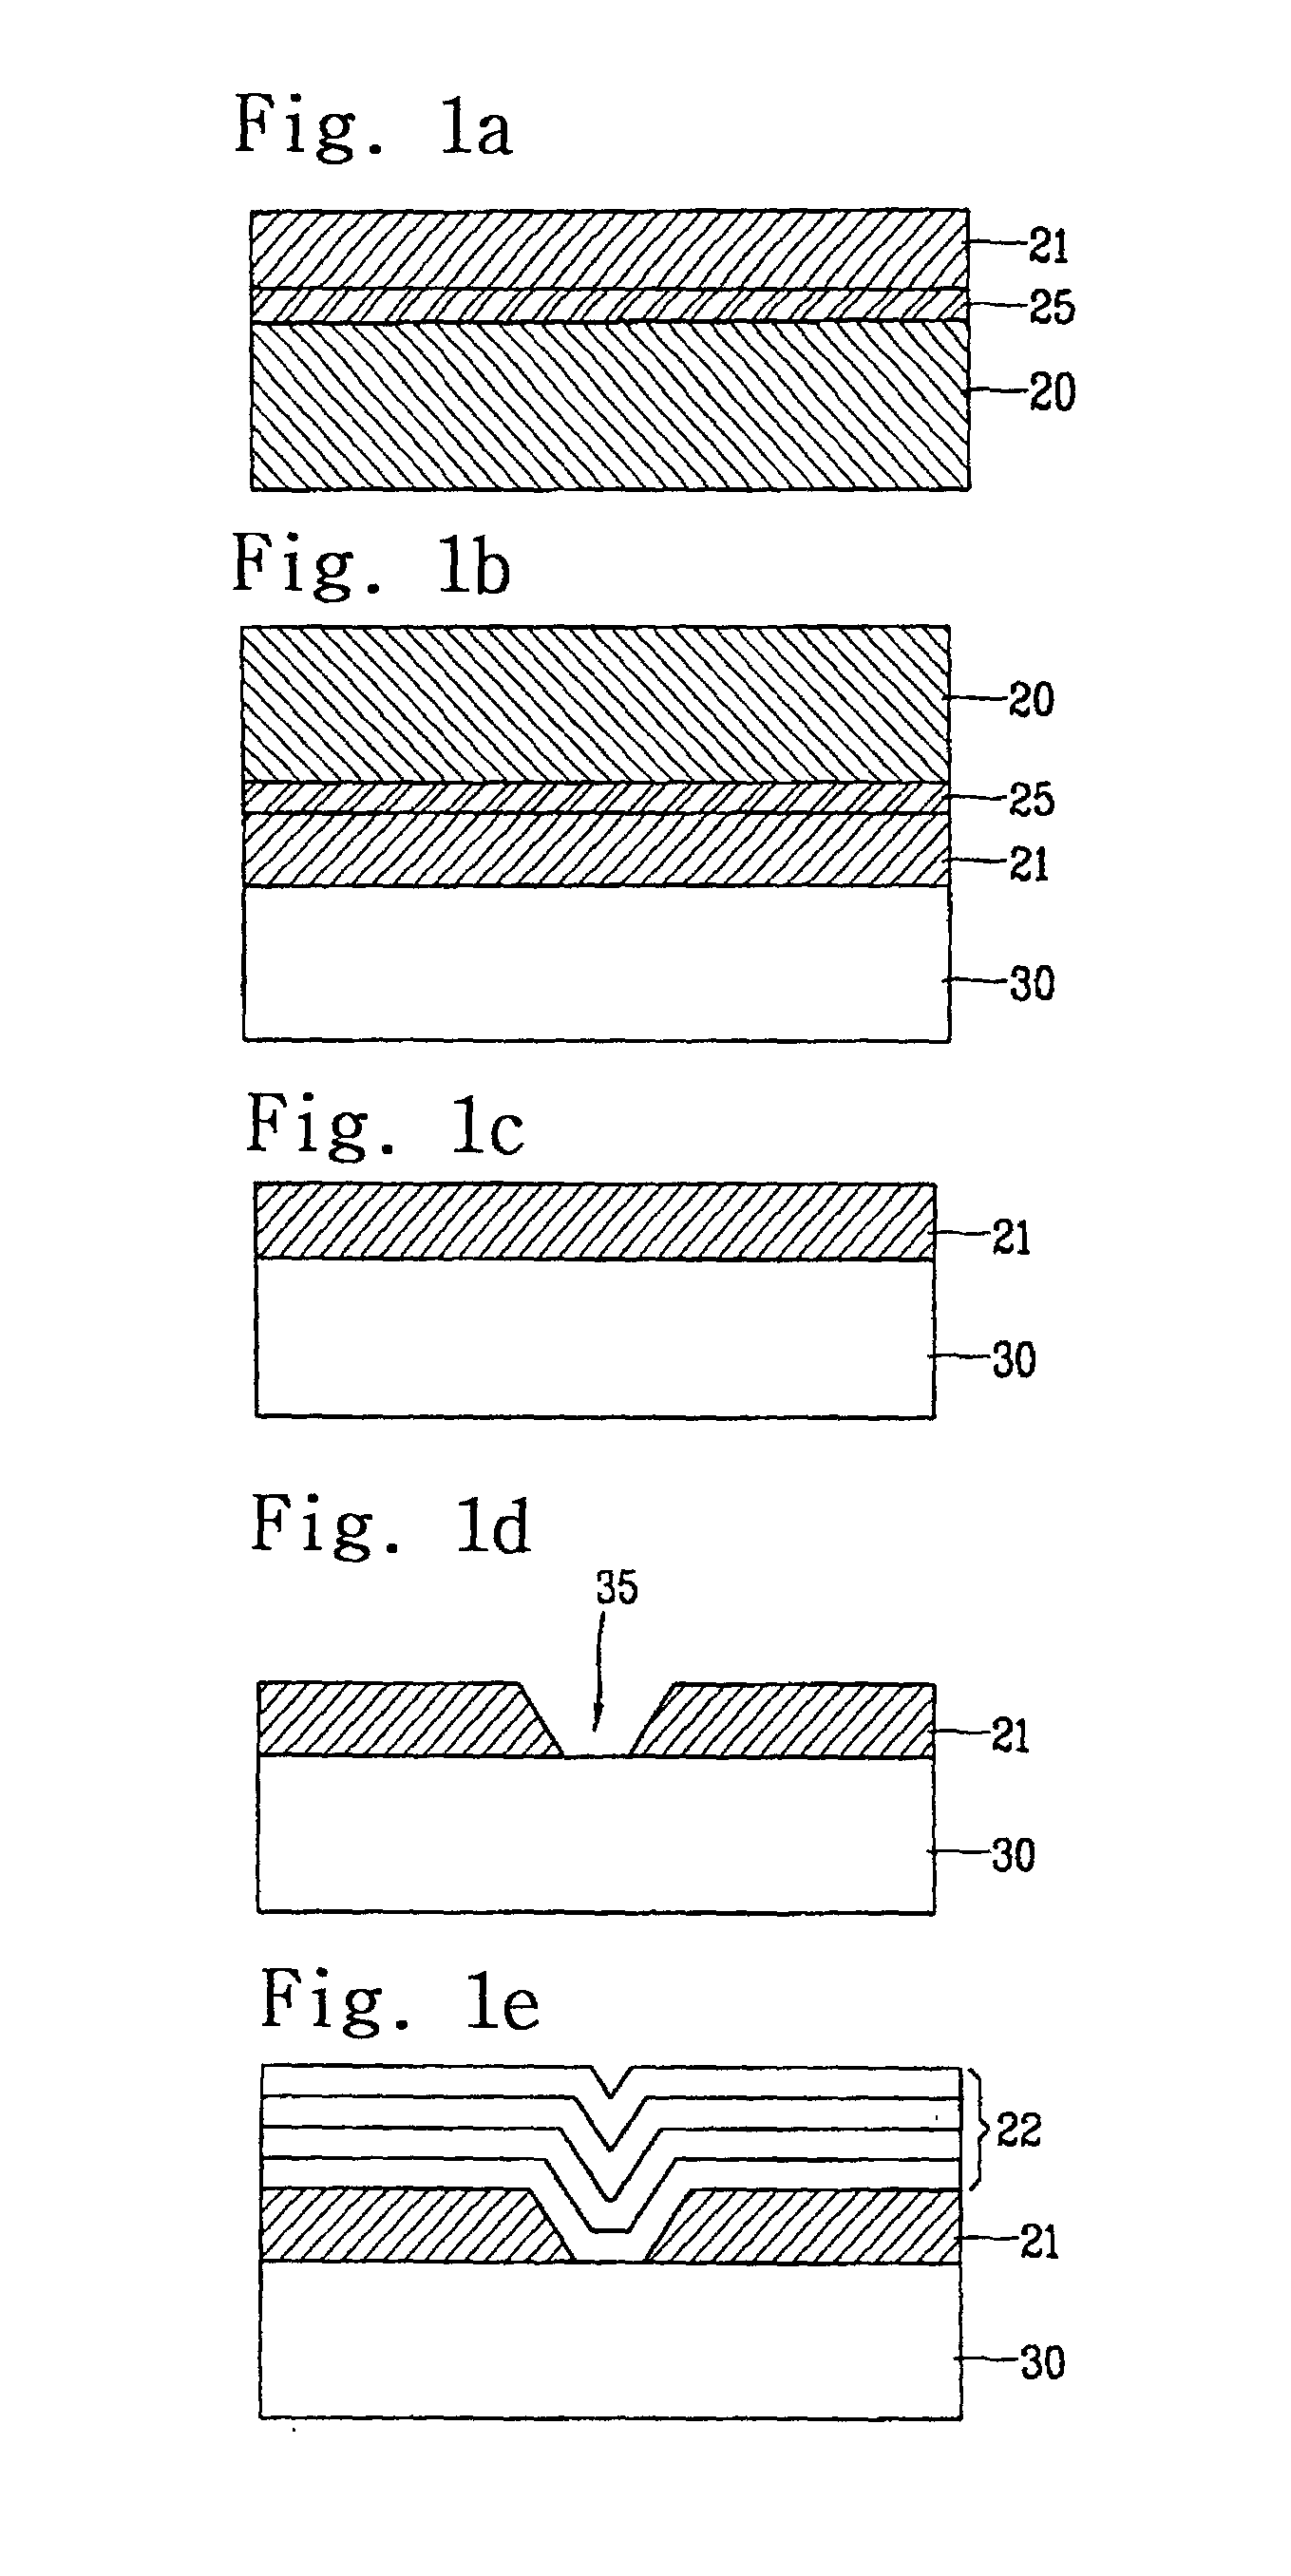 Method of fusion for heteroepitaxial layers and overgrowth thereon